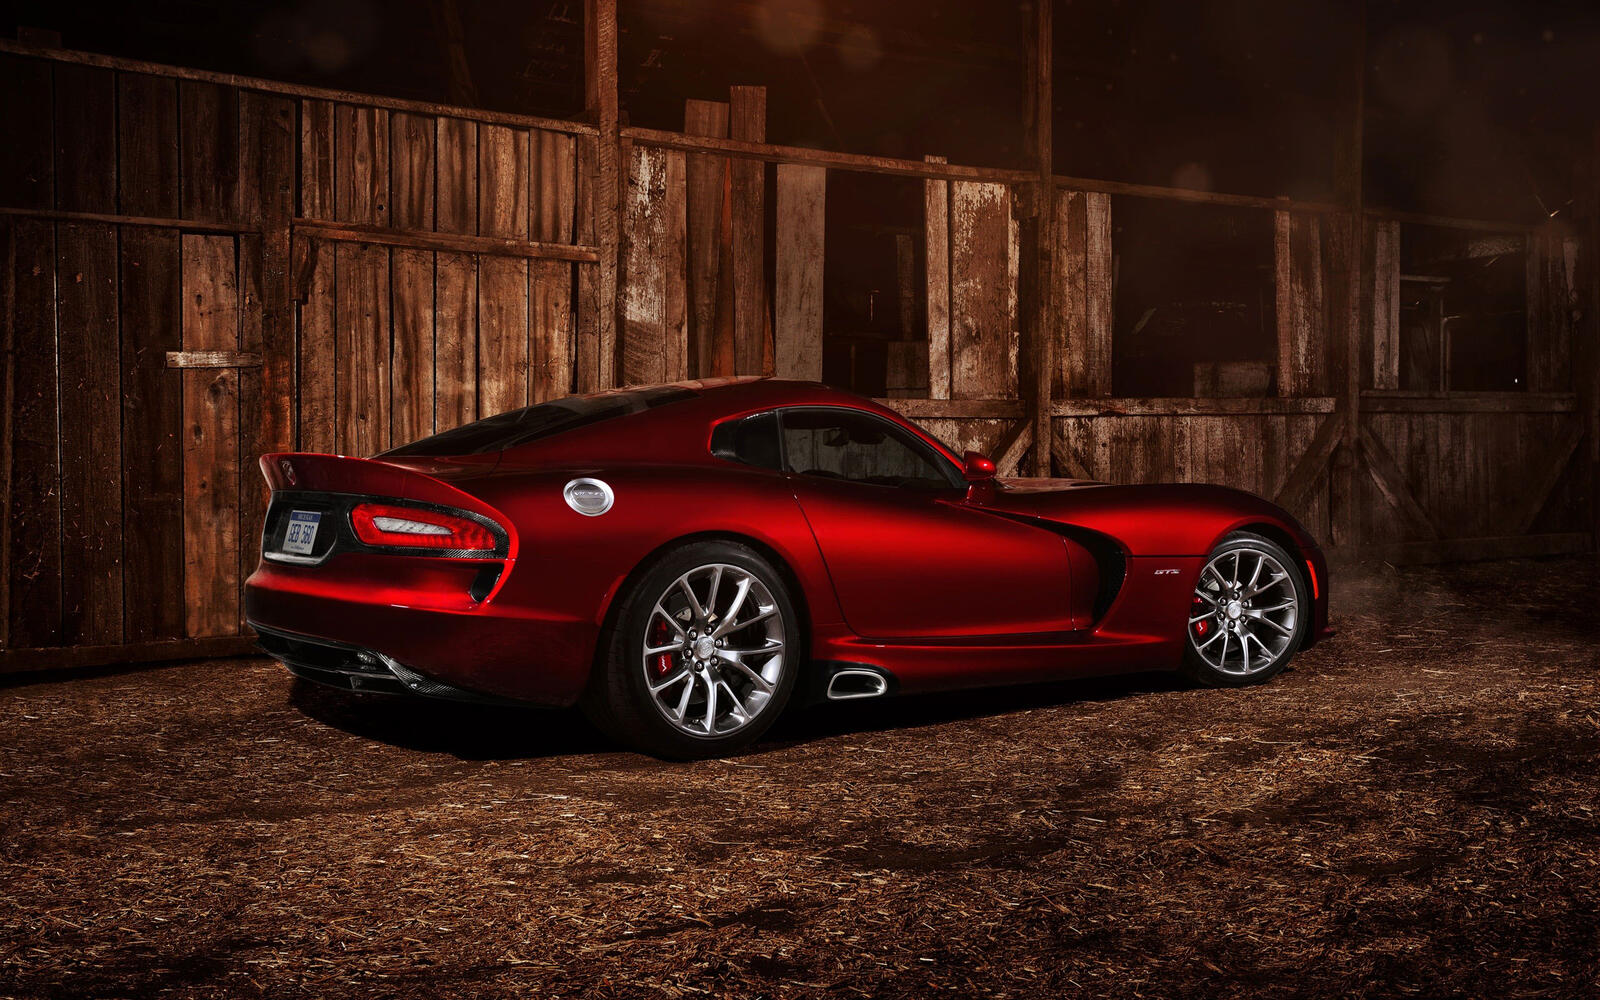 Wallpapers Dodge Viper cherry cars on the desktop